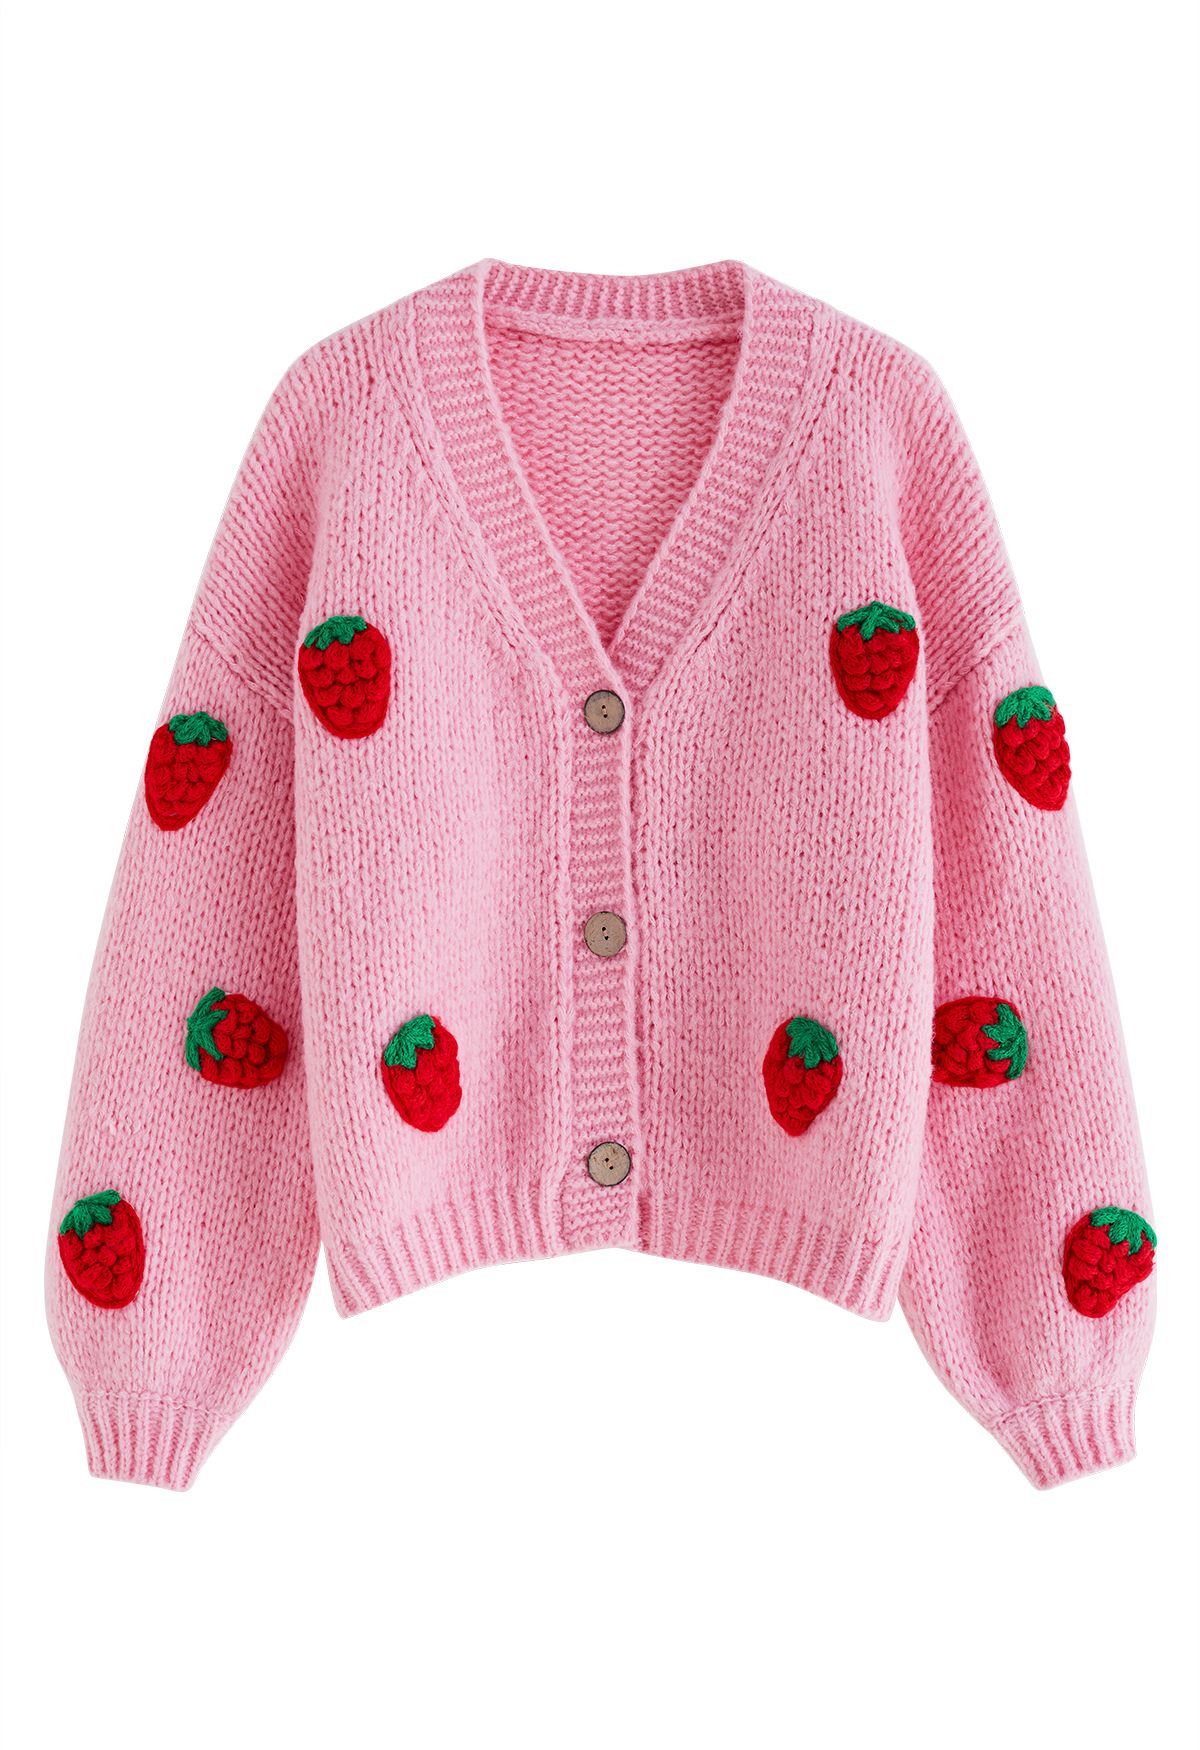 Stitch Strawberry Button Up Hand Knit Cardigan in Candy Pink | Chicwish